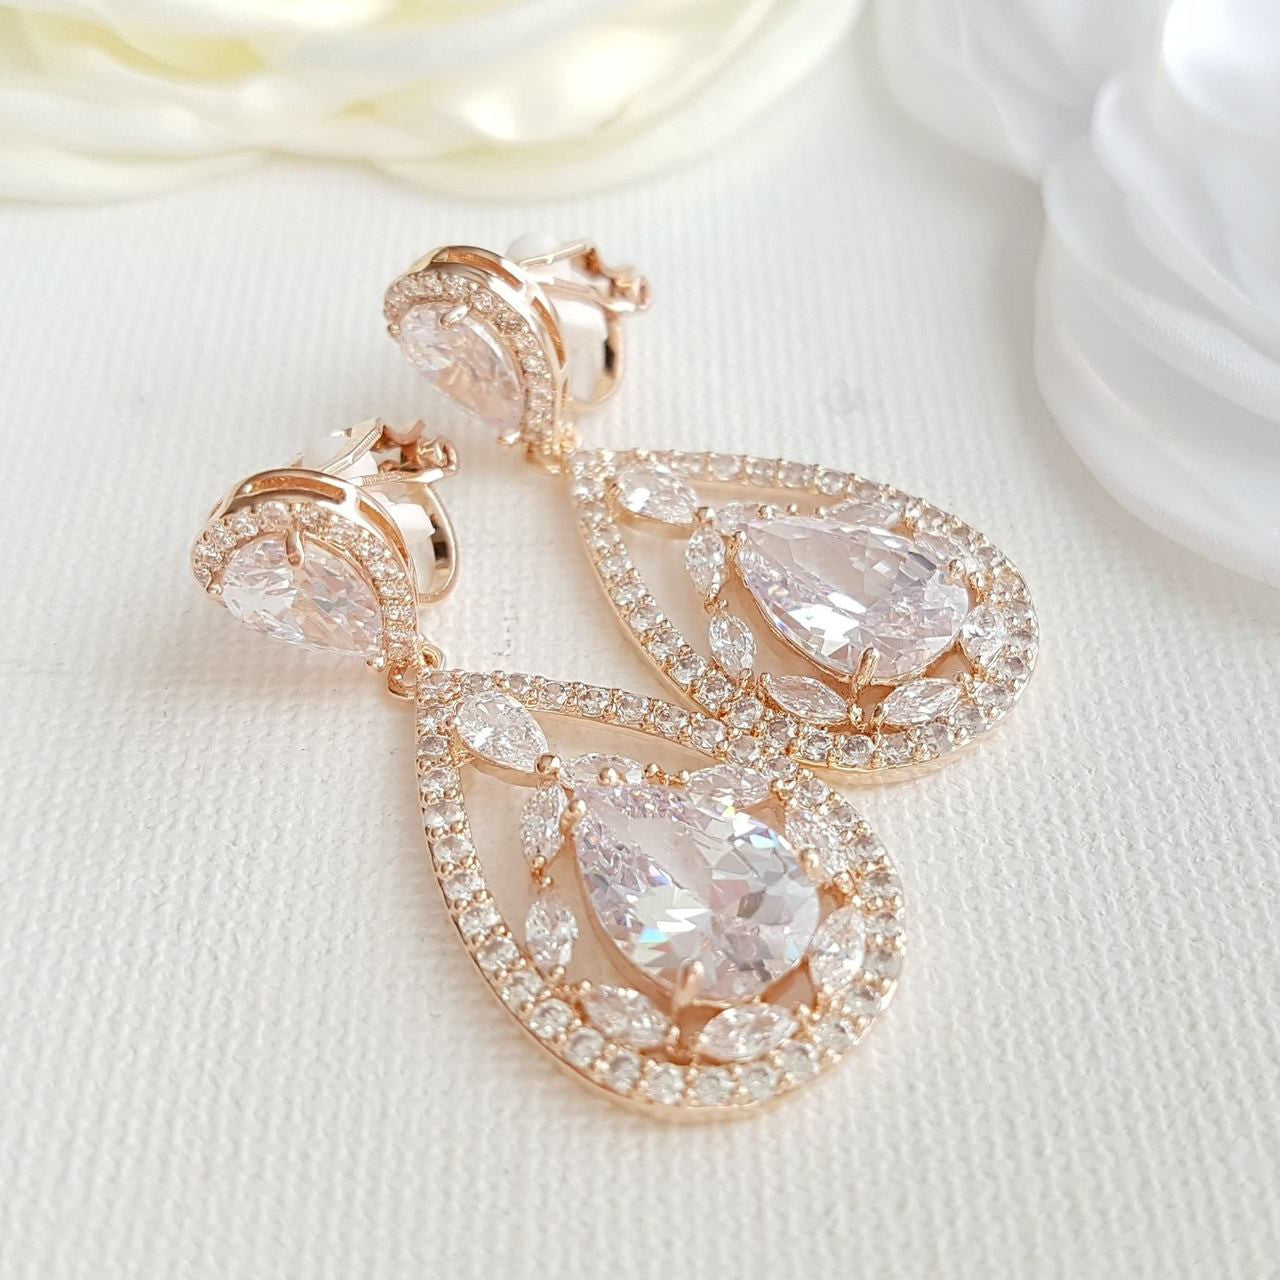 Wedding Rose Gold CLIP ON Earrings Crystal Bridal Earrings Gold Teardrop Earrings Wedding Earrings Non Pierced Ears Bridal Jewelry, Esther